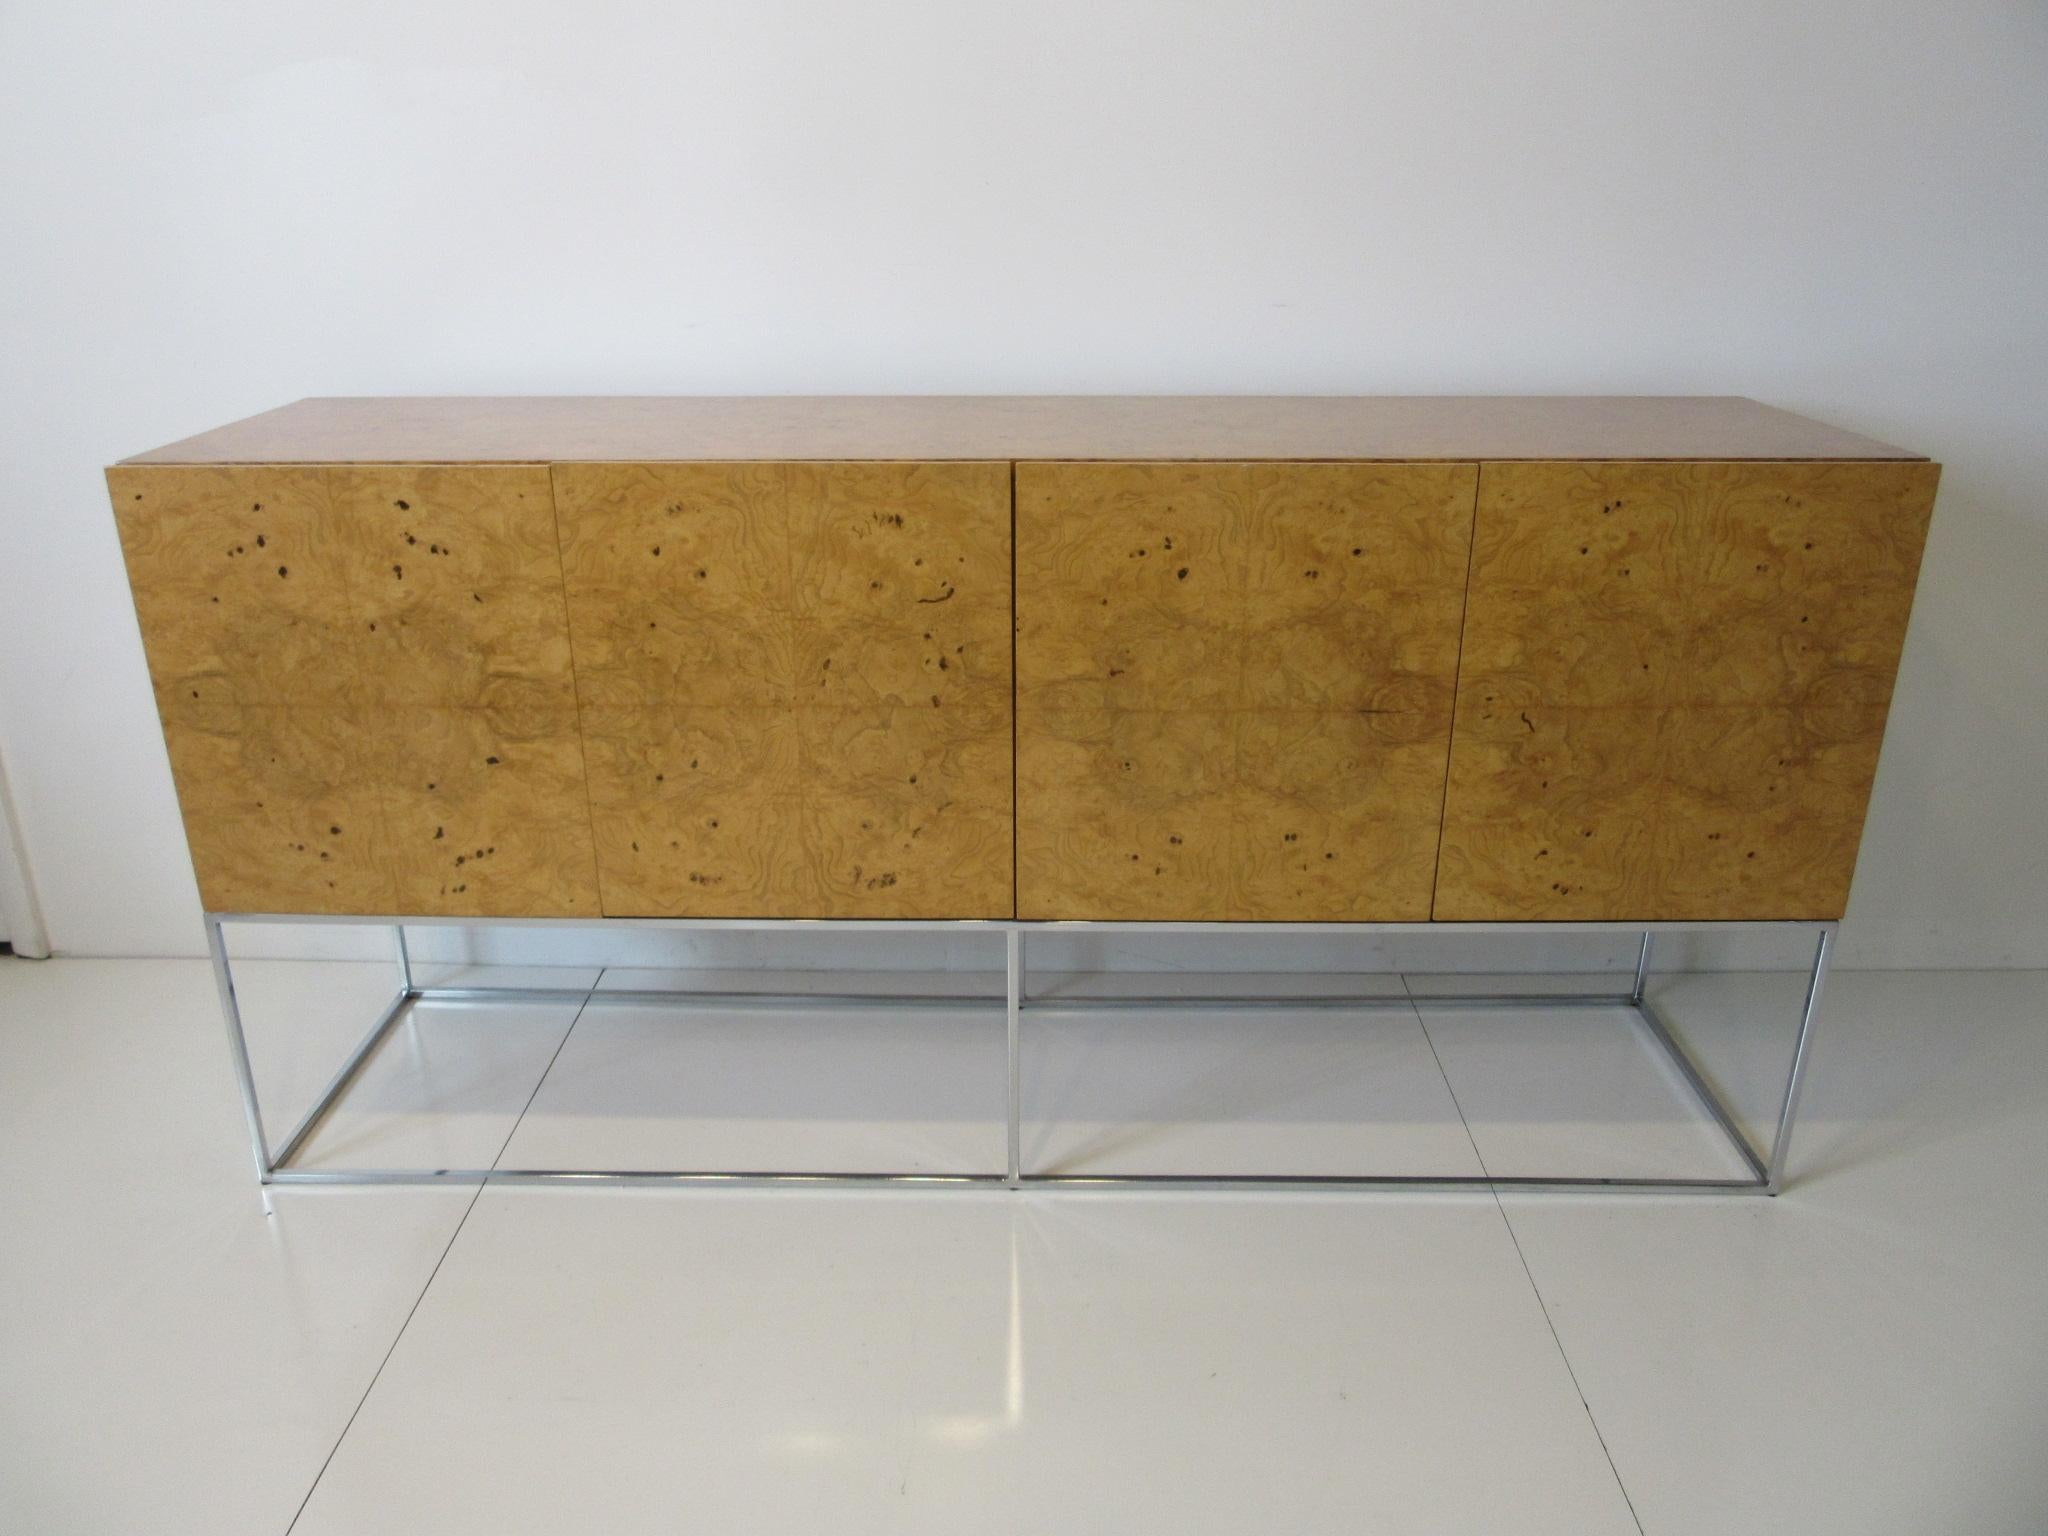 A beautifully book matched four door olive wood burl credenza or server floating on a polished chrome squared tubed steel base having two drawers and storage with two adjustable shelves. By Milo Baughman this is one of his most sought after designs